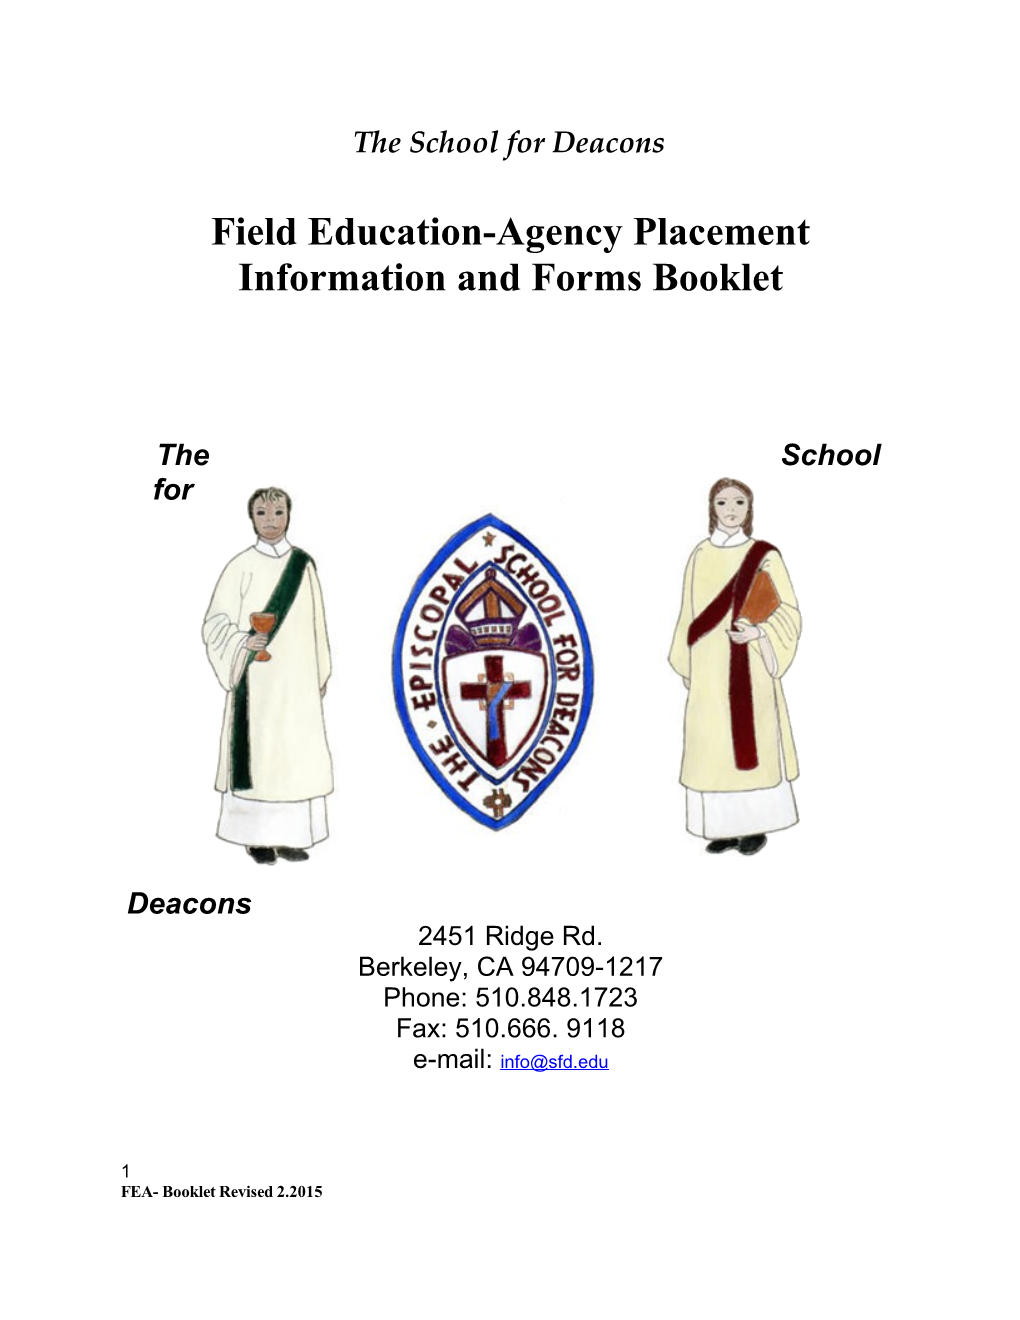 The School for Deacons